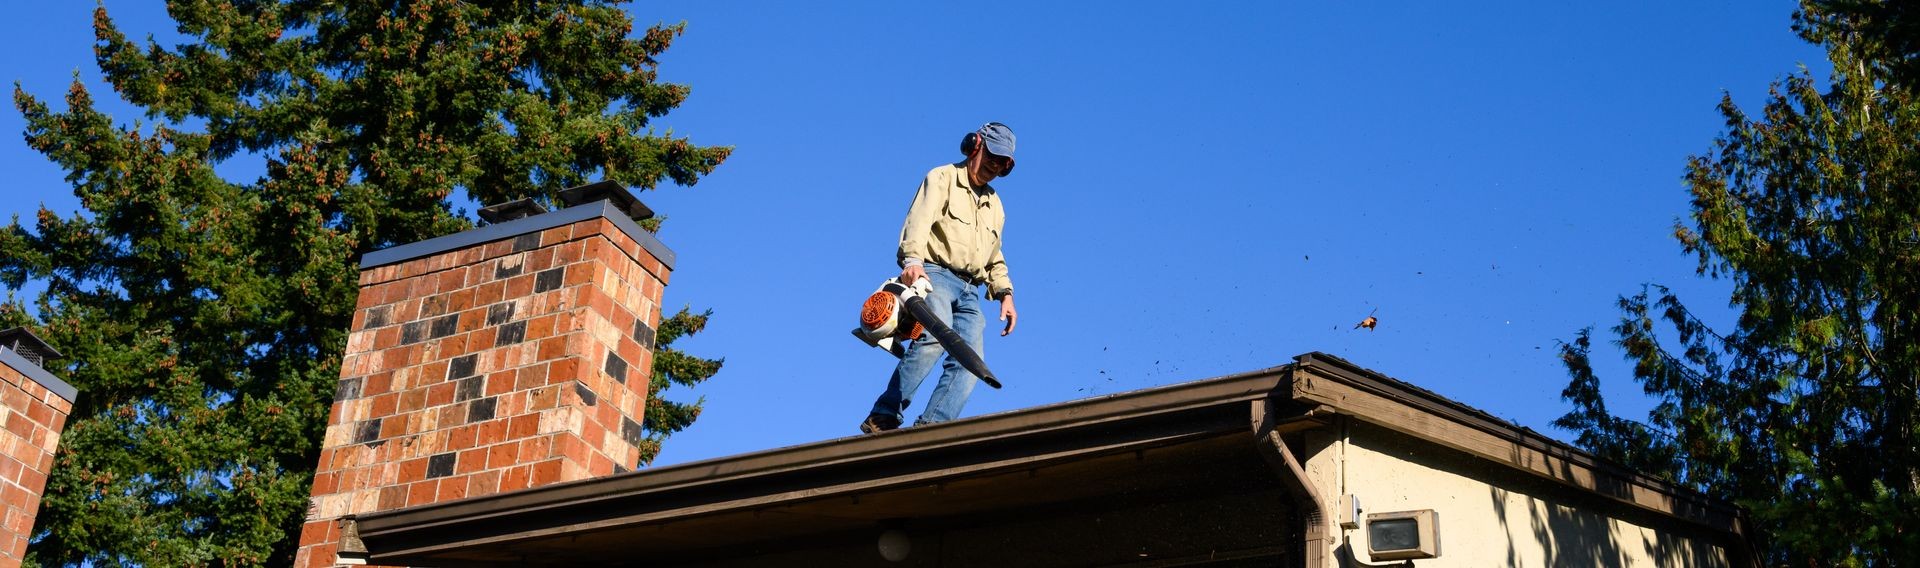 Roof Cleaning and Maintenance